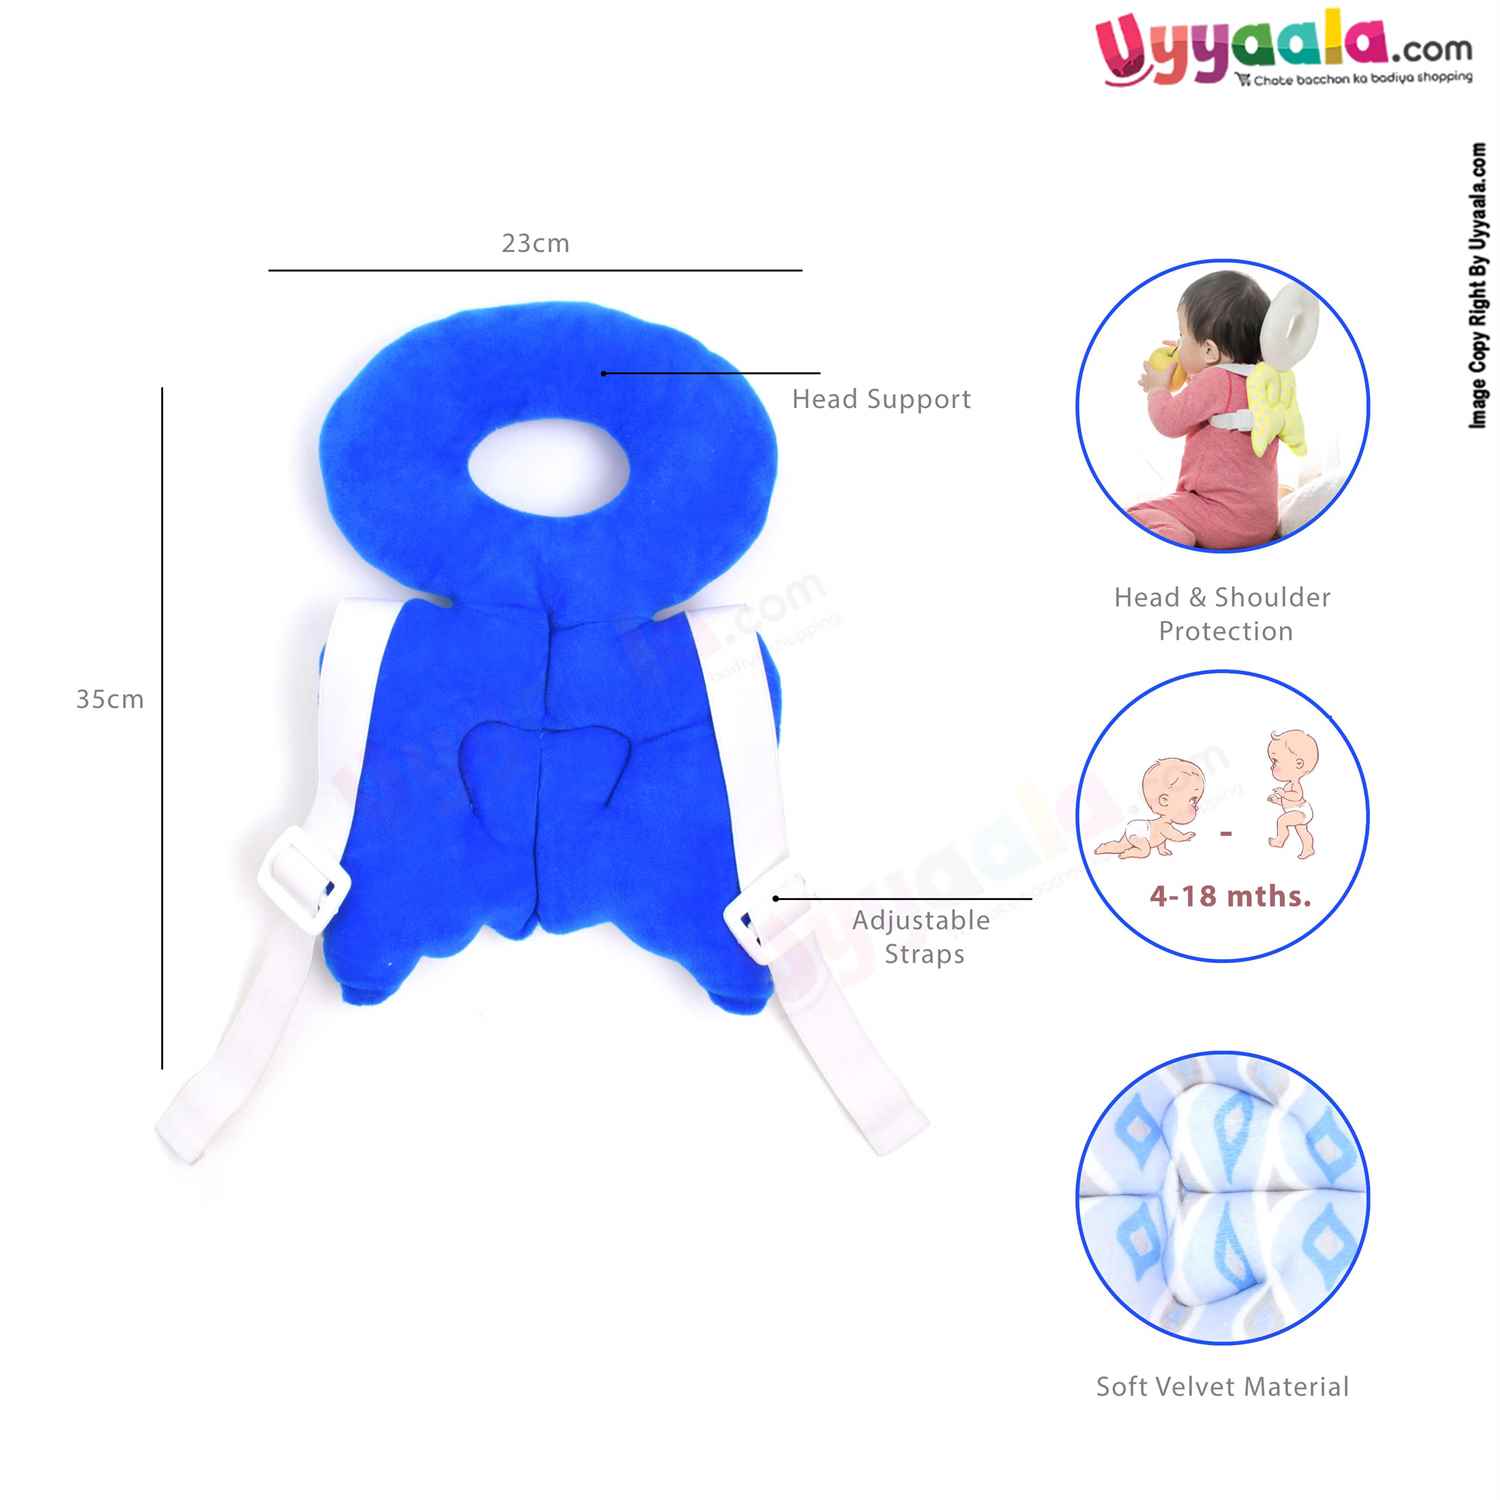 Head Protector Pillow for babies